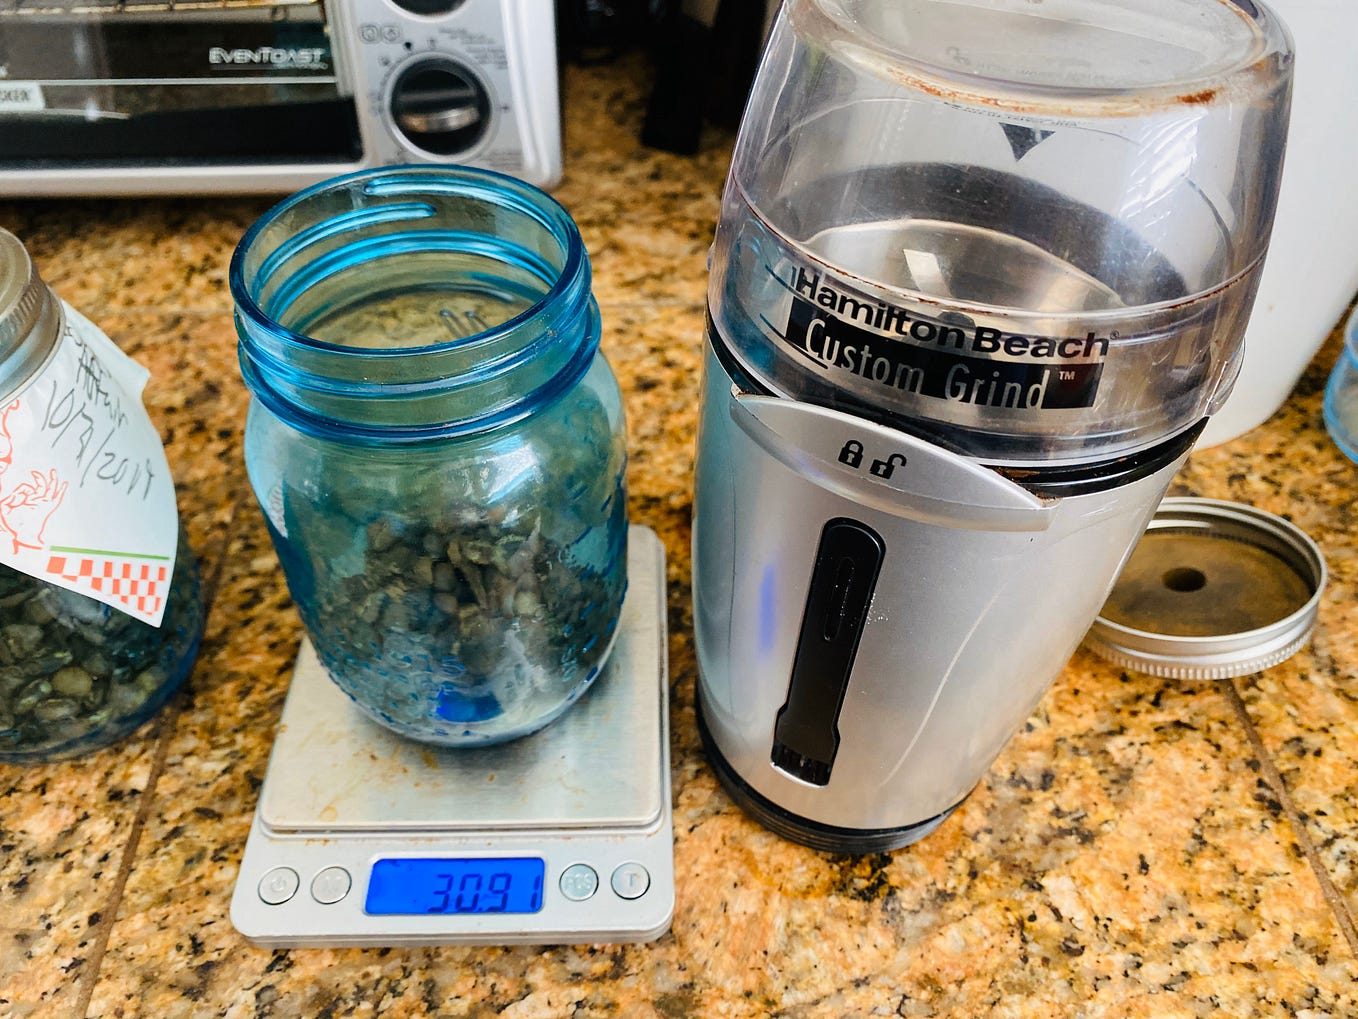 Affordable Coffee Grinders: A Comparison, by Robert McKeon Aloe, Overthinking Life